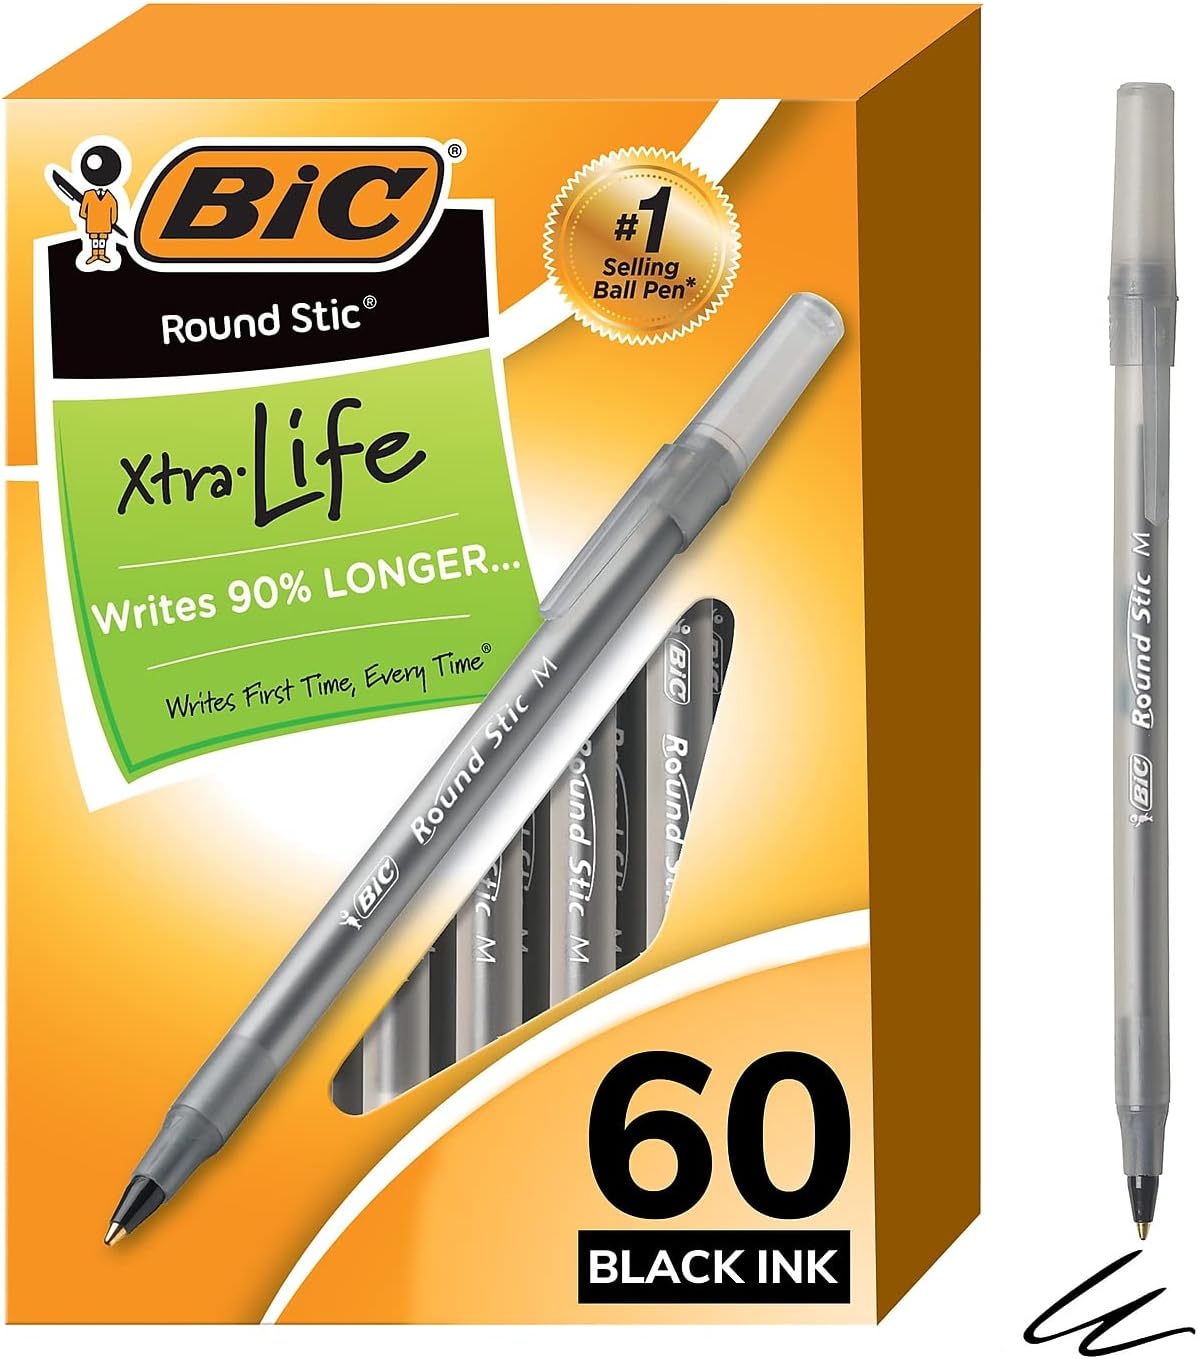 BIC Round Stic Xtra Life Ballpoint Pens, Medium Point (1.0mm), Black, 60-Count Pack, Flexible Round Barrel For Writing Comfort (GSM609-BLK)